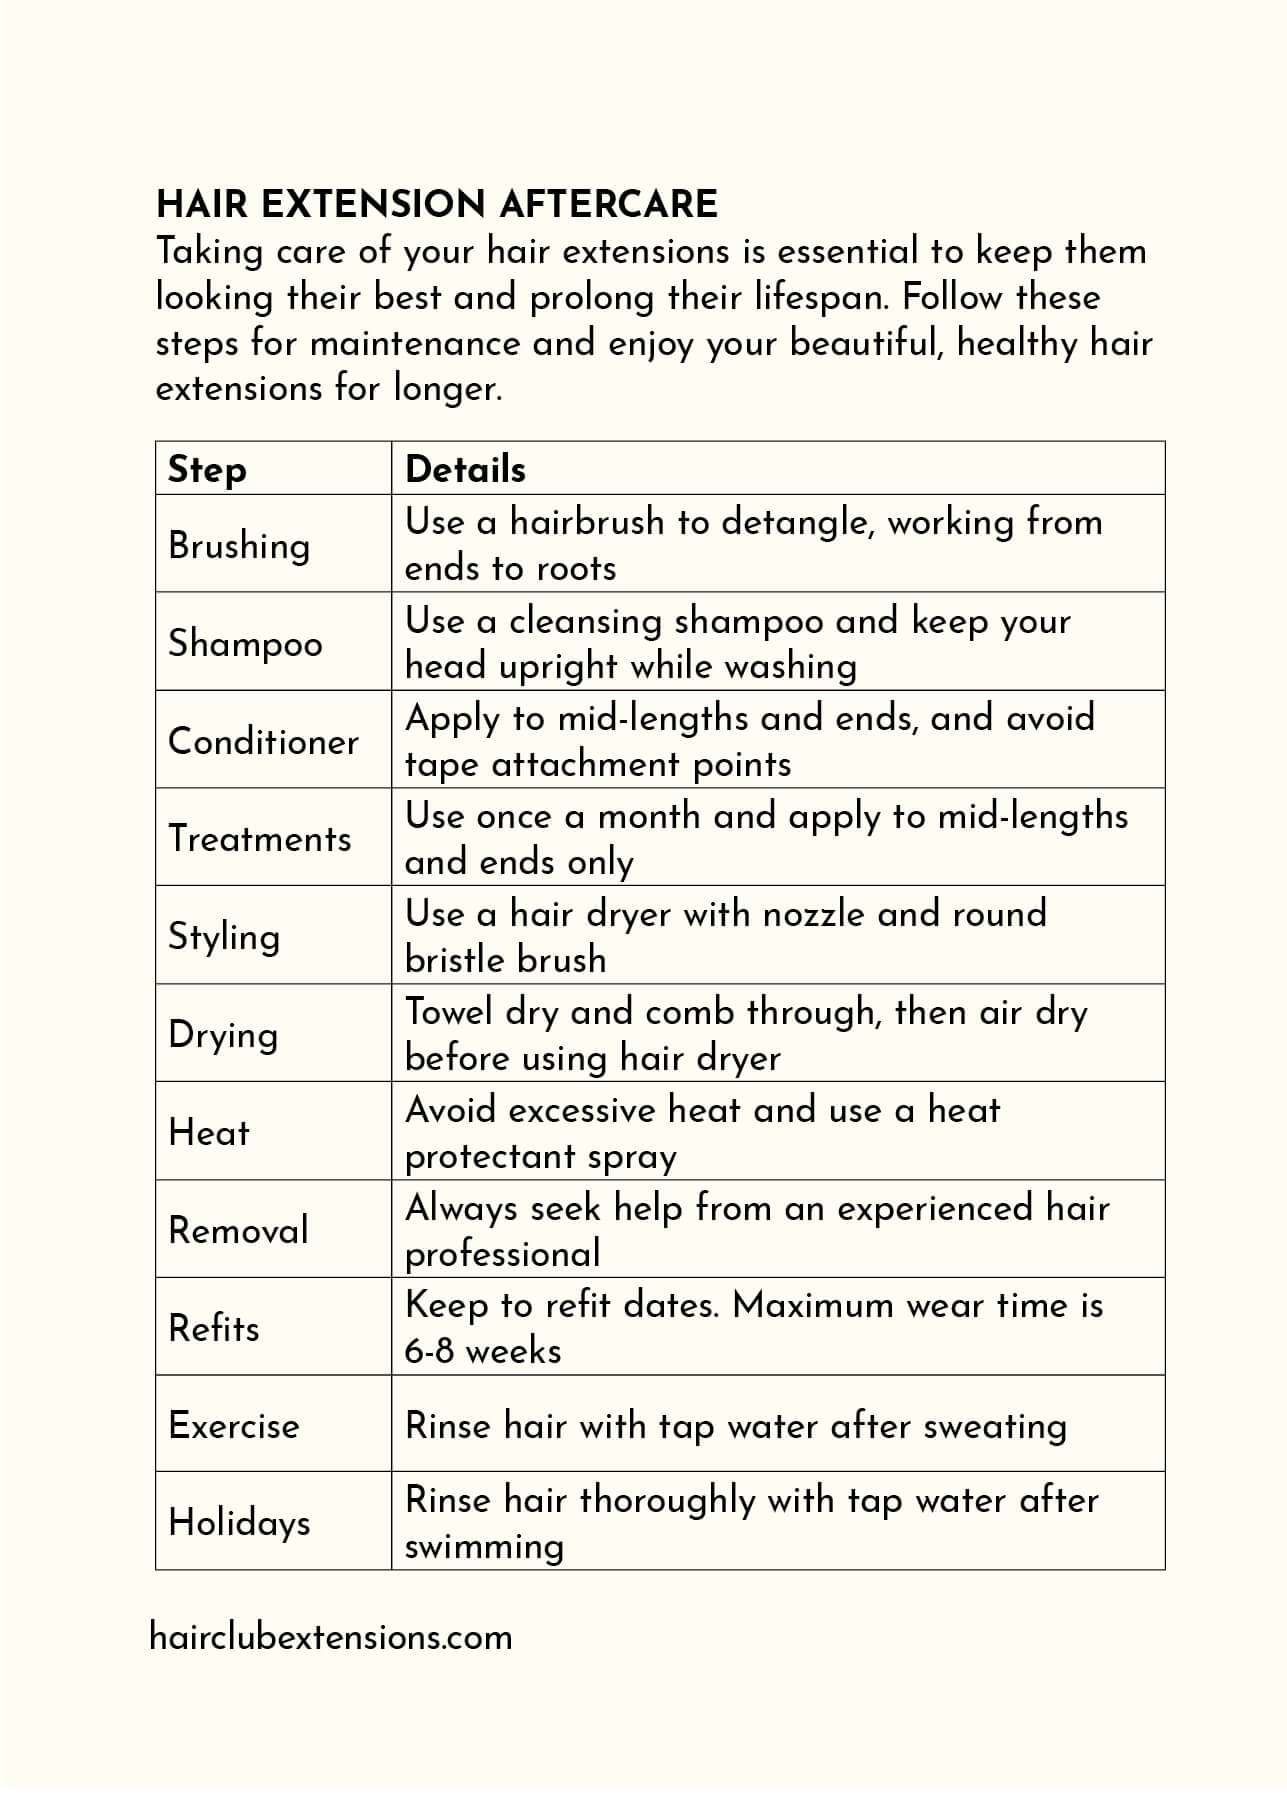 Hair Extension Aftercare Guide Page 2